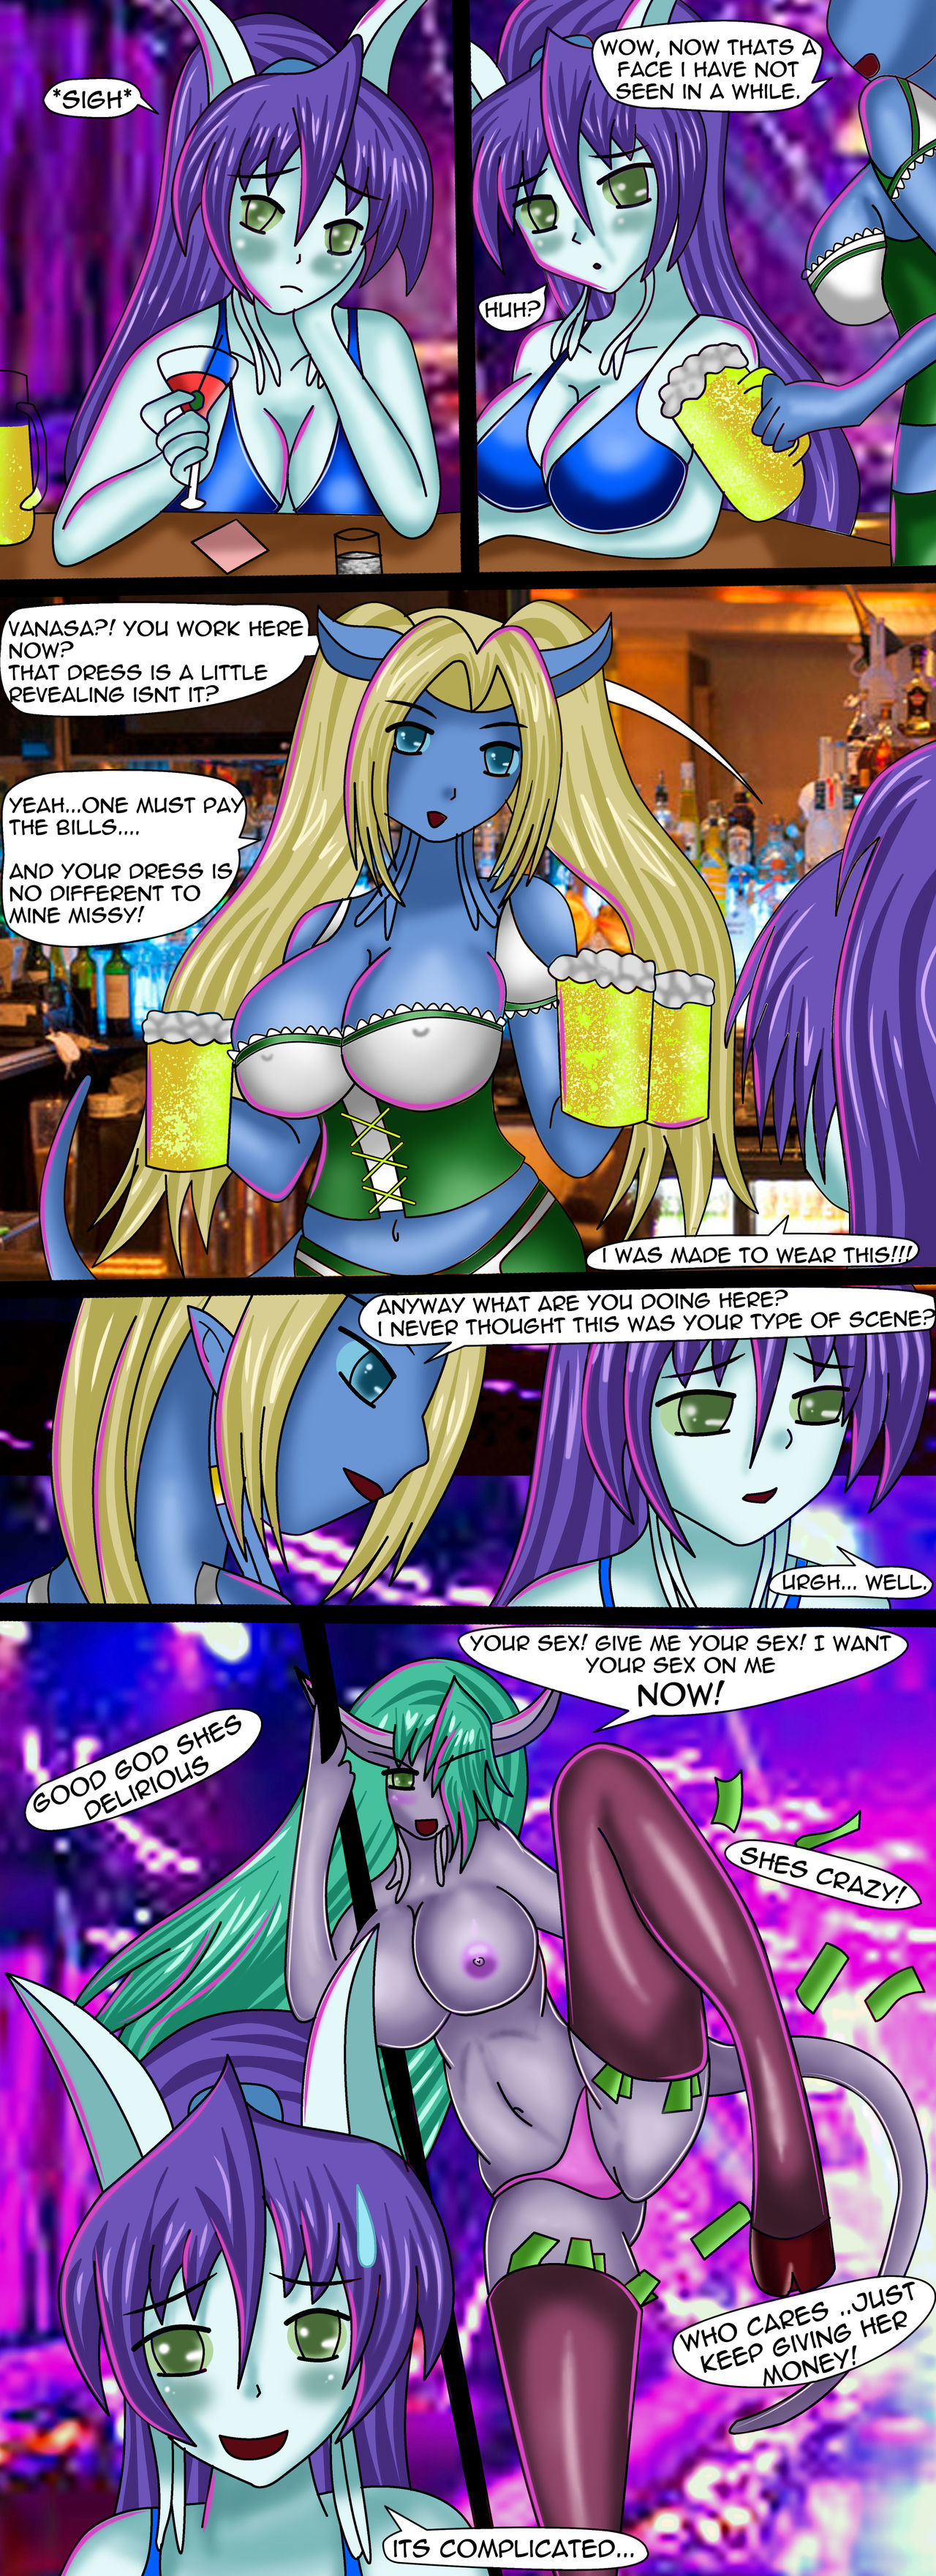 Fated Union World of Warcraft by Eviane page 20